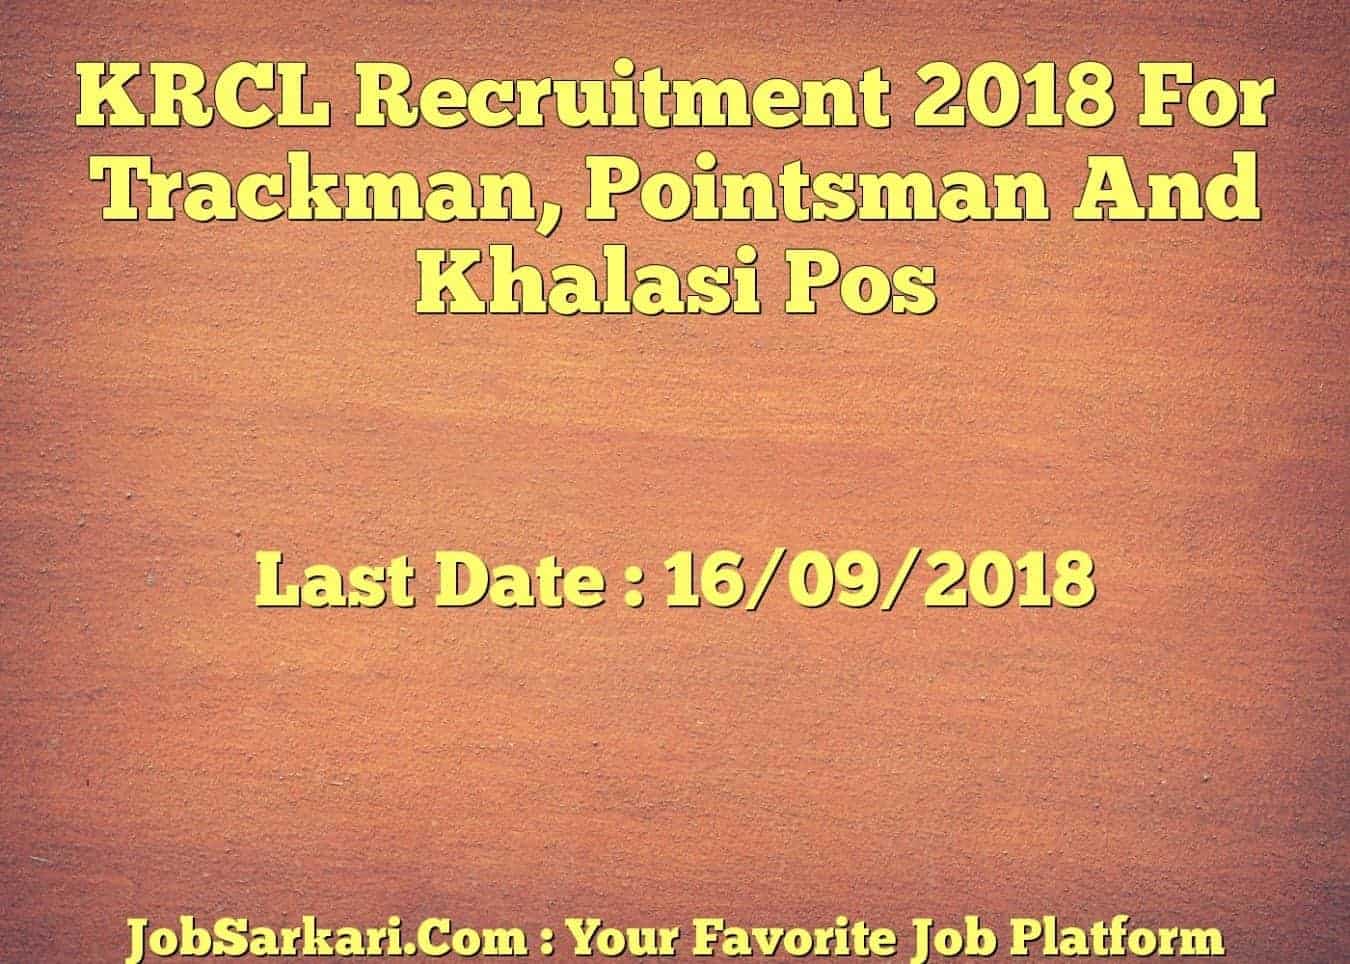 KRCL Recruitment 2018 For Trackman, Pointsman And Khalasi Post